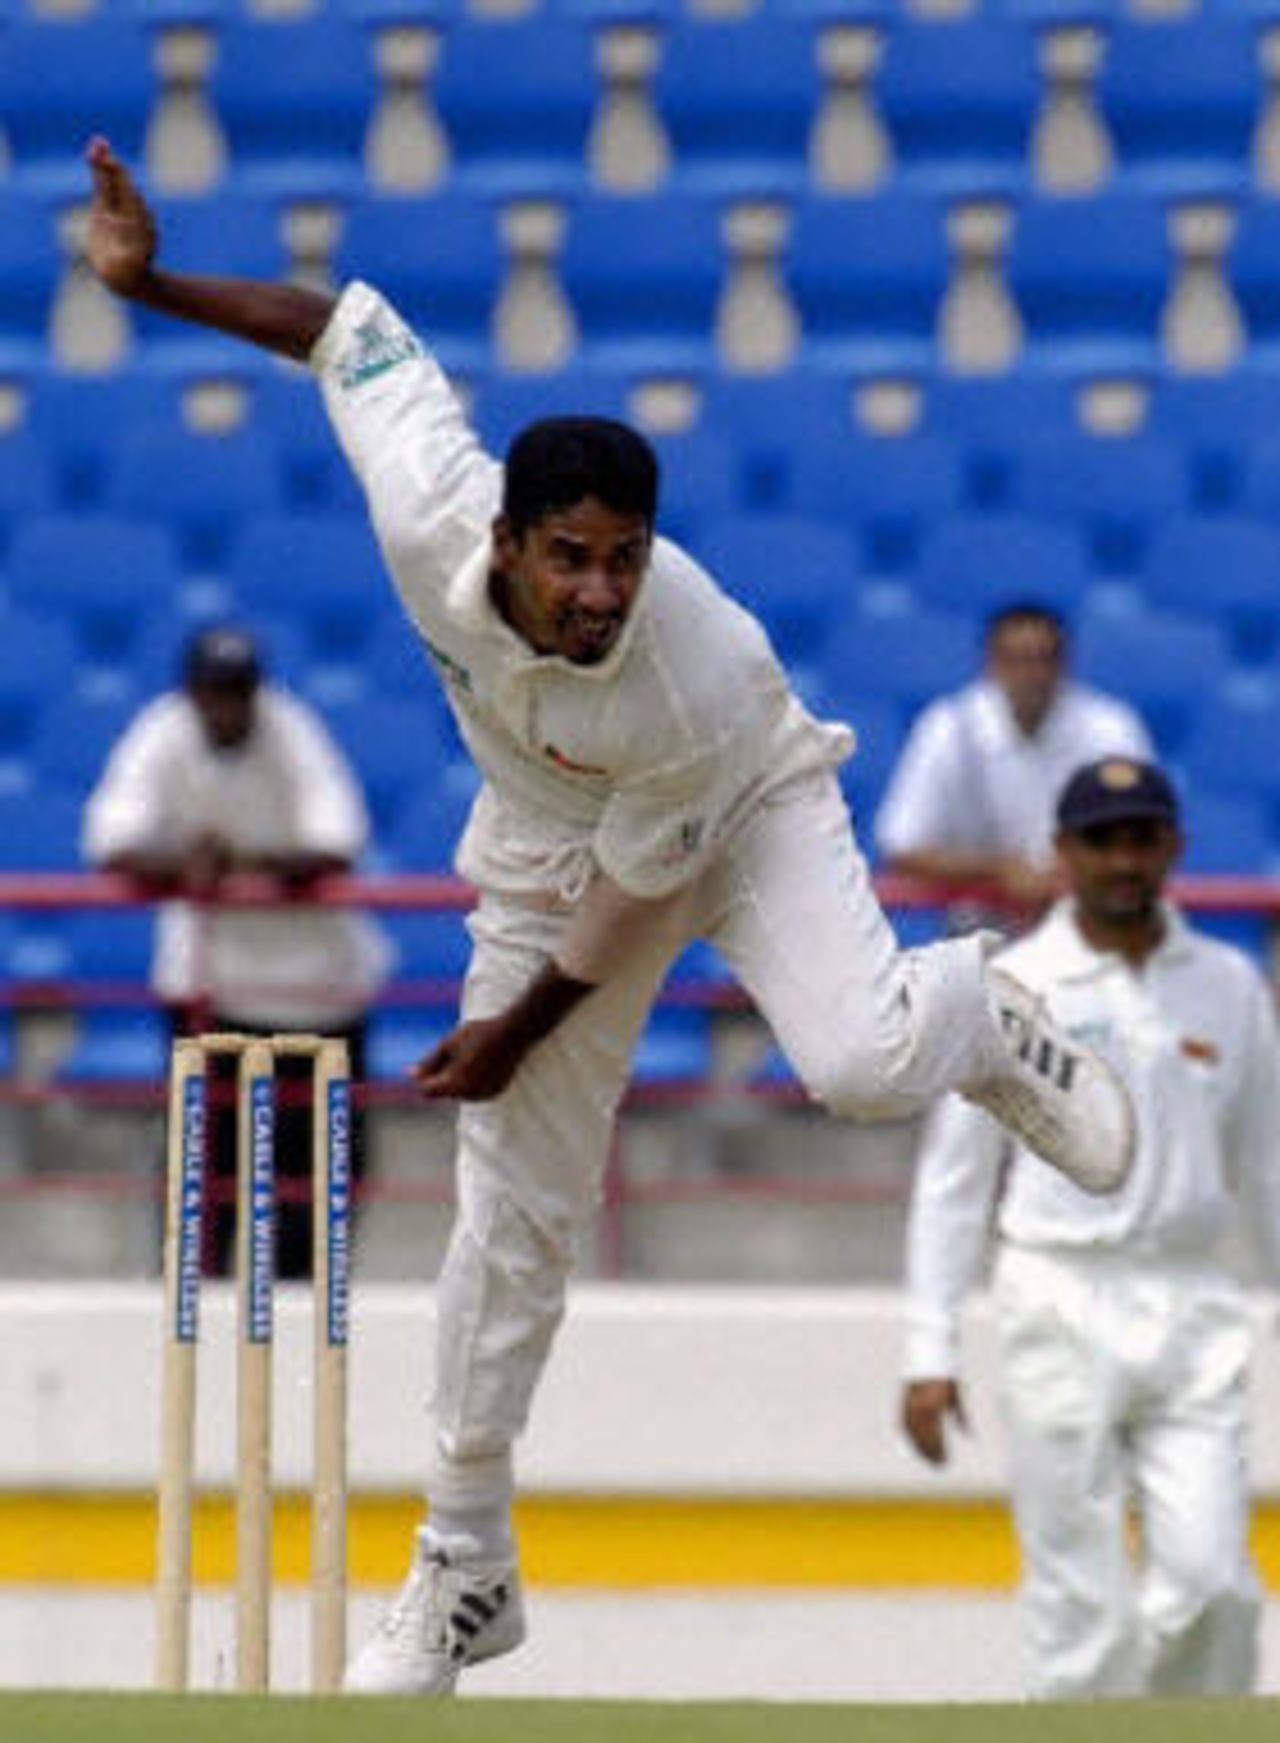 Chaminda Vaas in action on the third day of first Test match between Sri Lanka and West Indies at St Lucia.